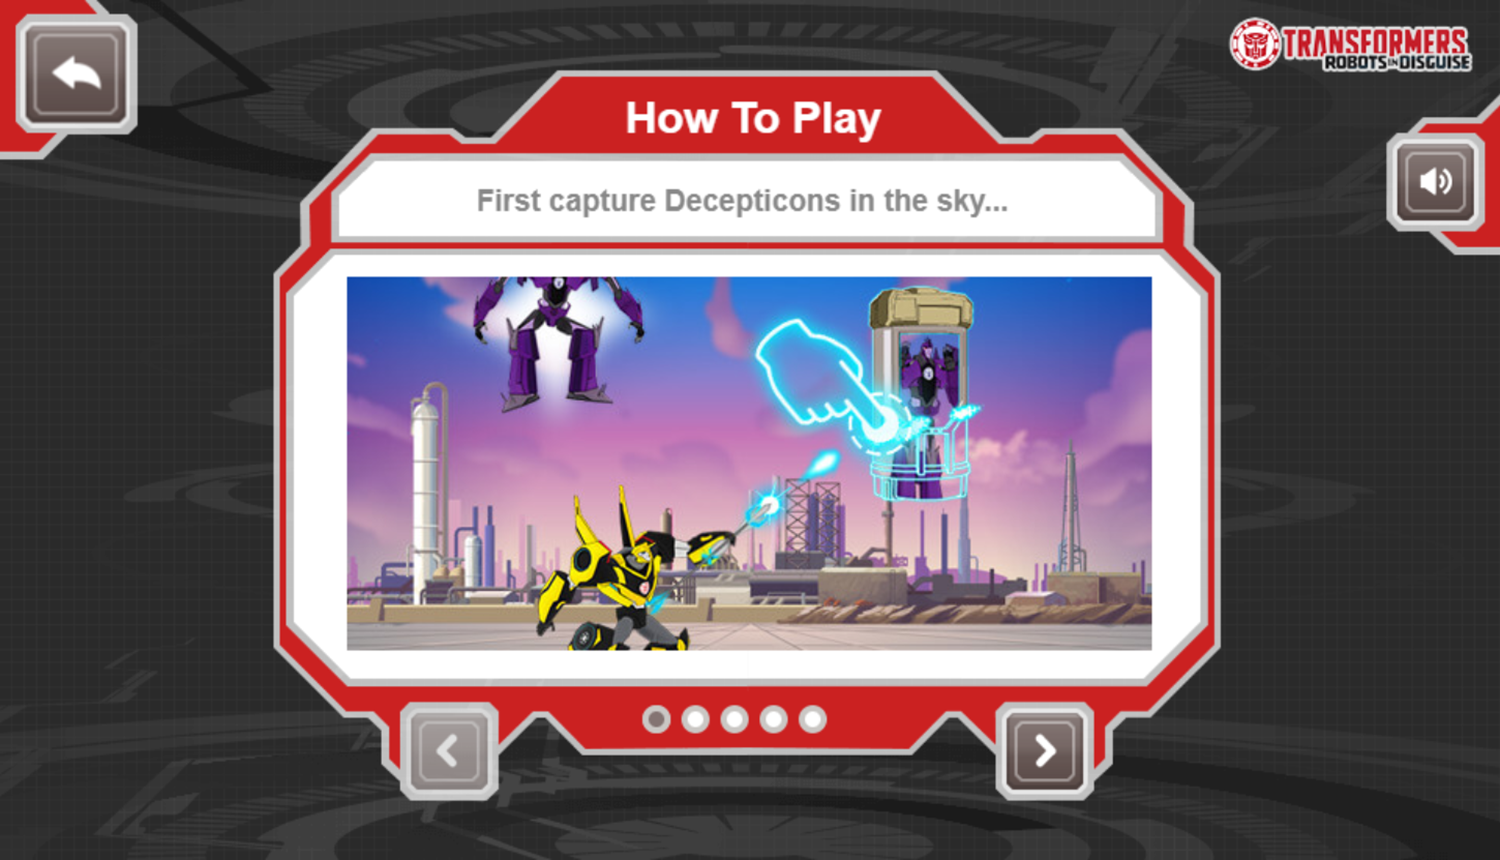 Transformers Protect Crown City Game How To Play Screenshot.